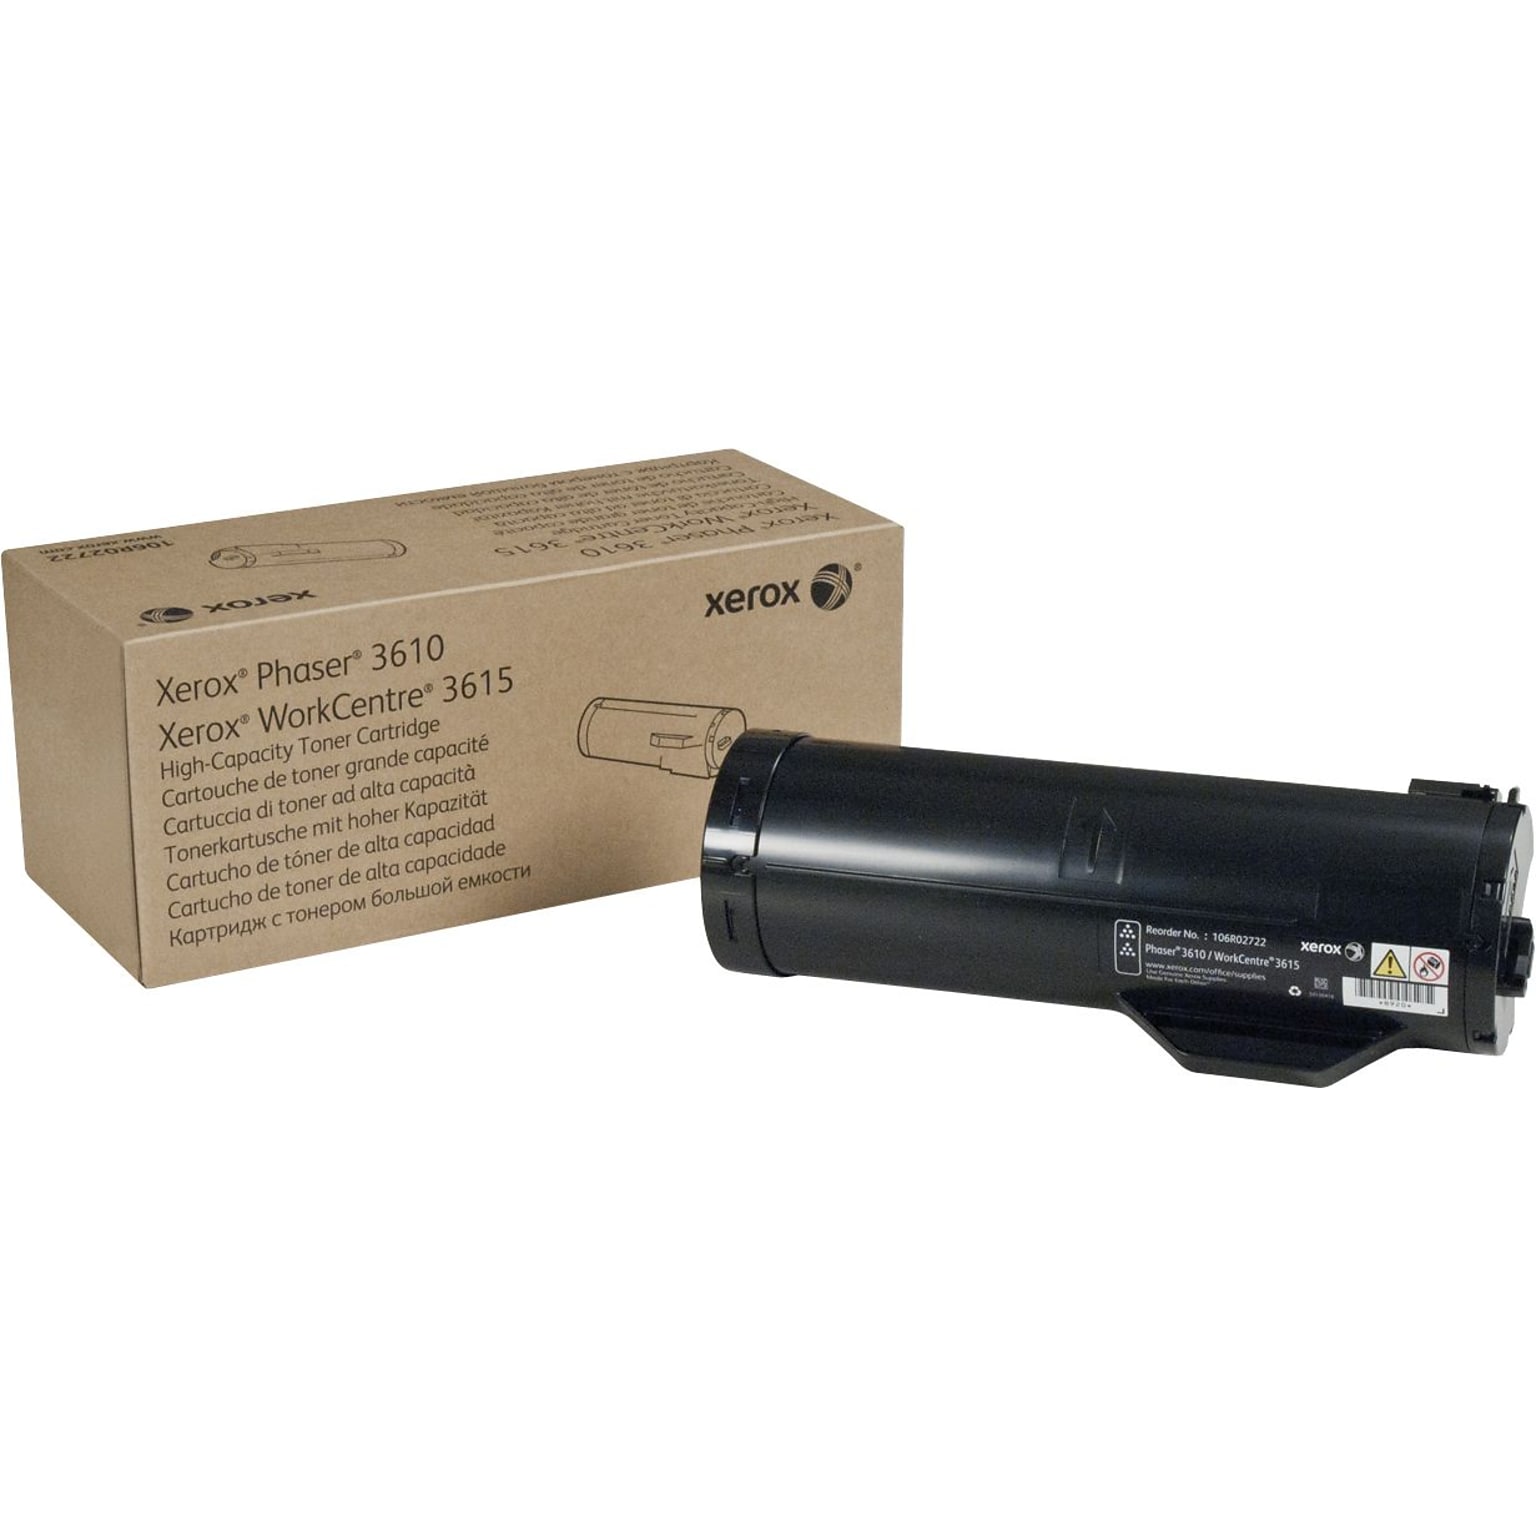 Xerox 106R02722 Black High Yield Toner Cartridge, Prints Up to 14,100 Pages (XER106R02722)